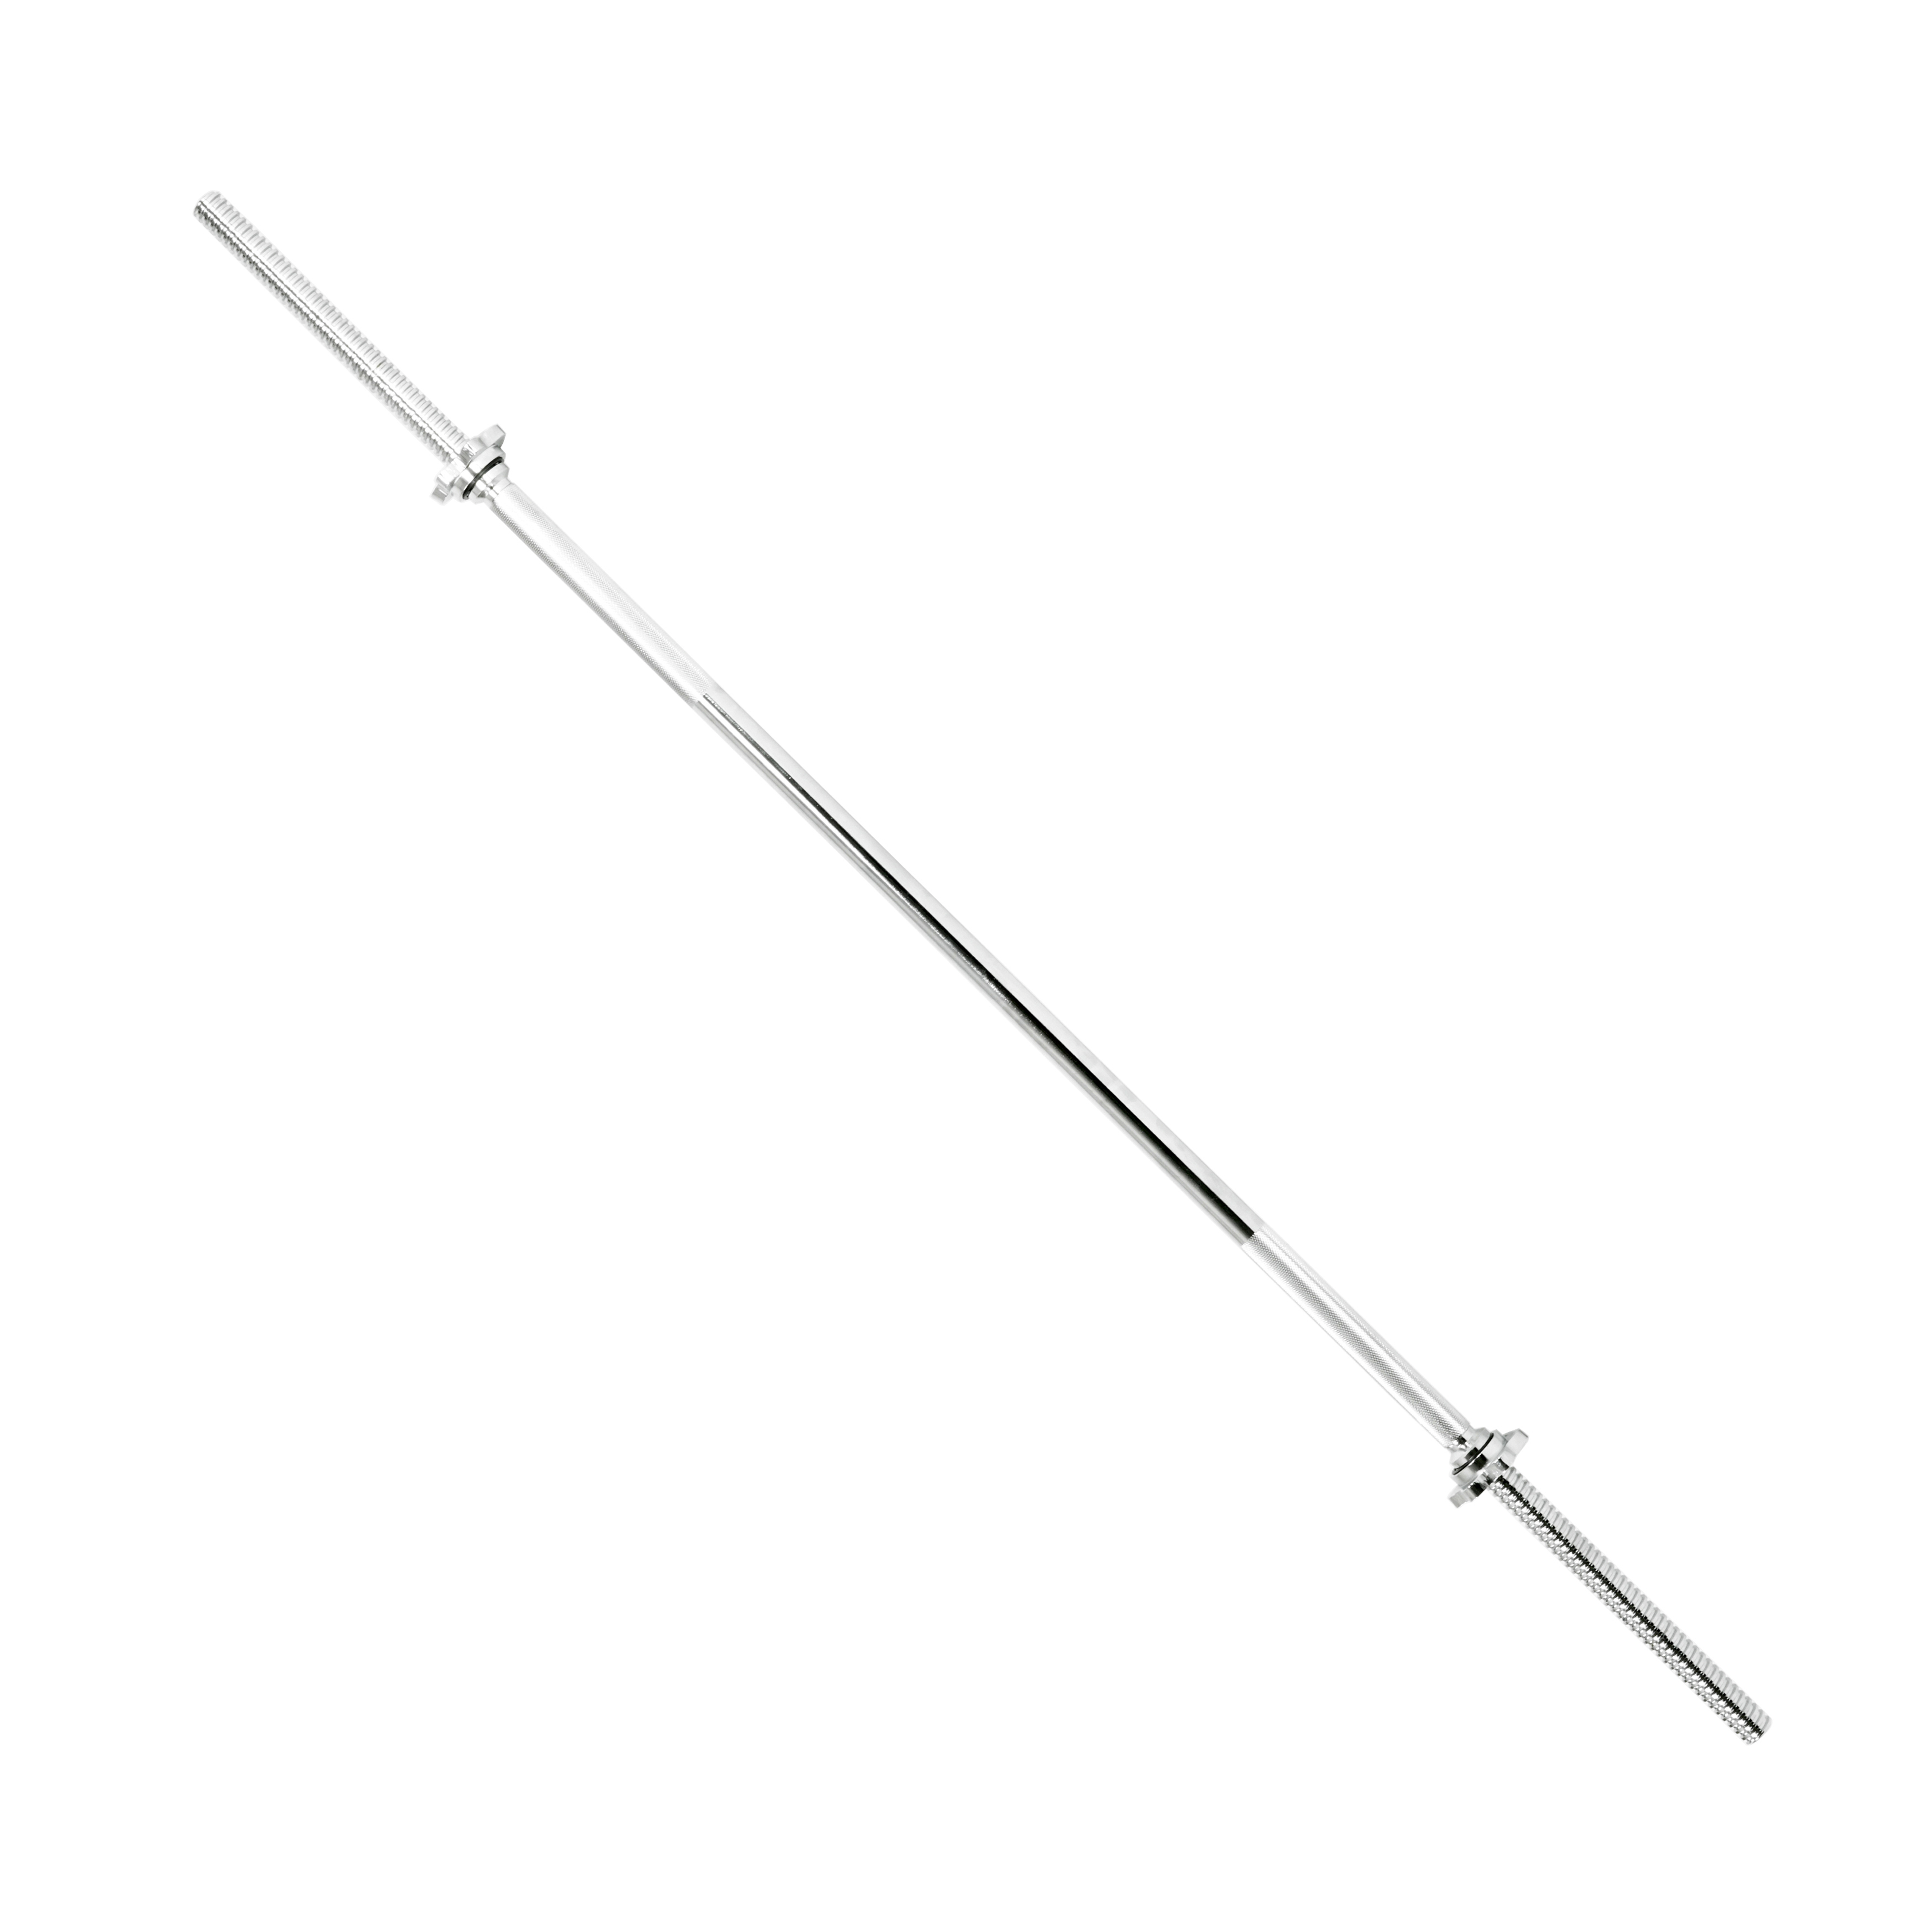 Sunny Health & Fitness Threaded Solid 60" Chrome Exercise Barbell Bar w/ 1" Barbell Diameter, Olympic Weight Lifting Bar, STBB-60 - image 2 of 8